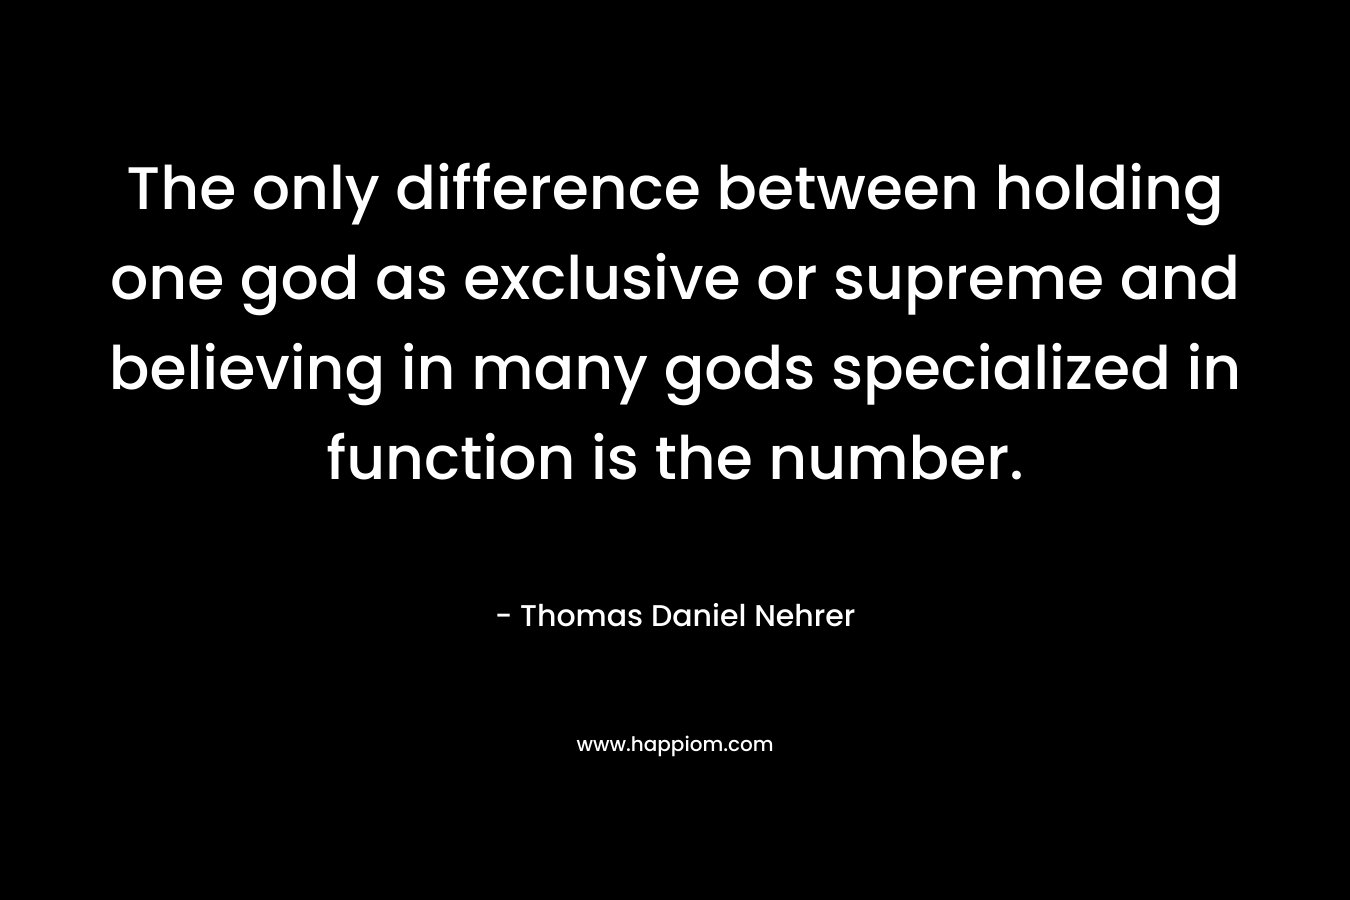 The only difference between holding one god as exclusive or supreme and believing in many gods specialized in function is the number. – Thomas Daniel Nehrer